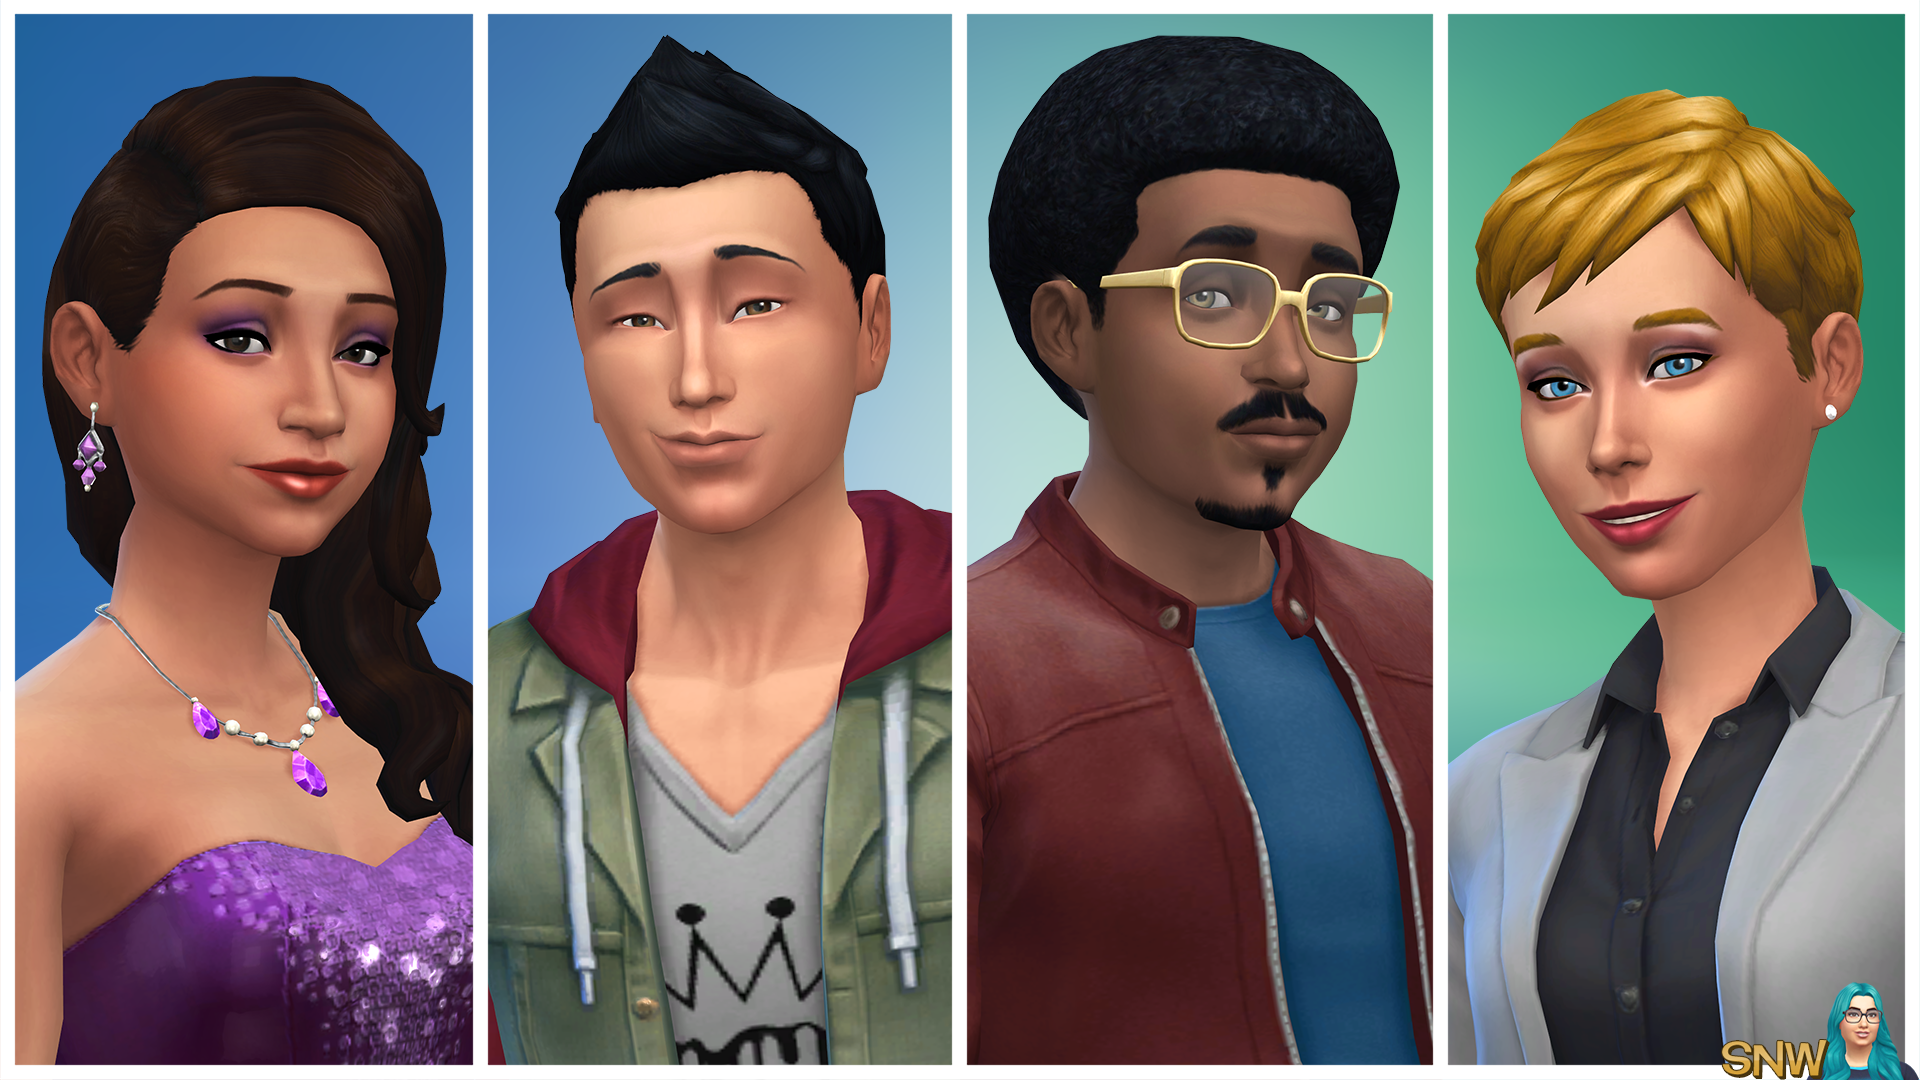 The Sims 4 on PS4 Xbox One consoles